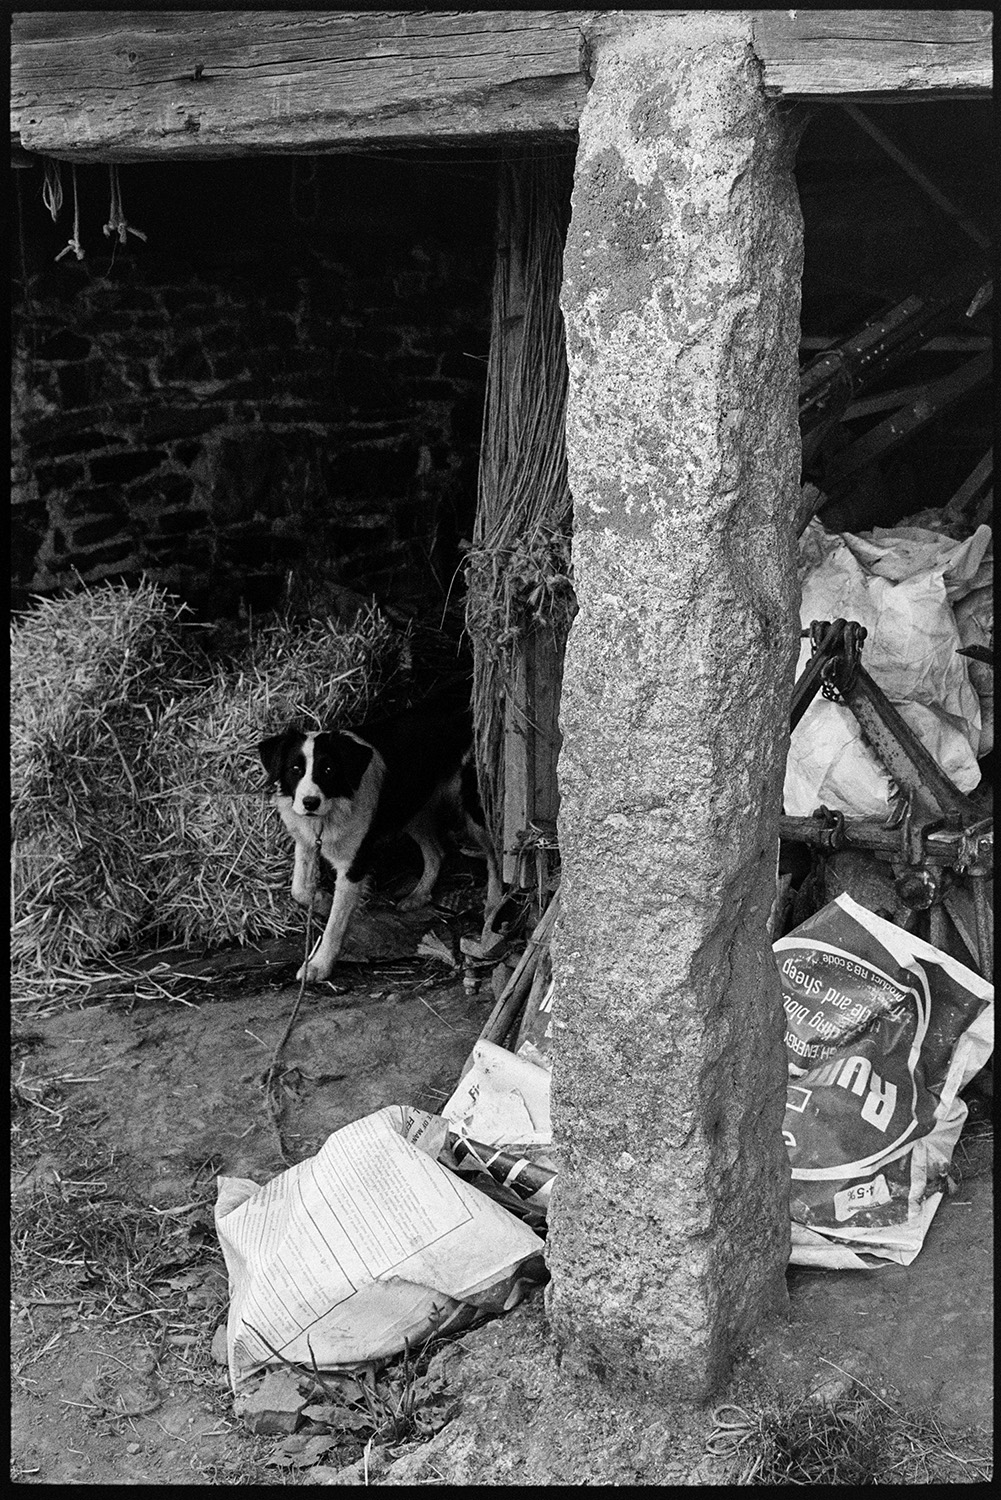 Stone pillar of barn with tethered dog and farm machinery. 
[A dog tethered in an open barn with hay bales and farm machinery at Lower Langham, Dolton. A stone pillar and wooden beam of the barn can be seen.]